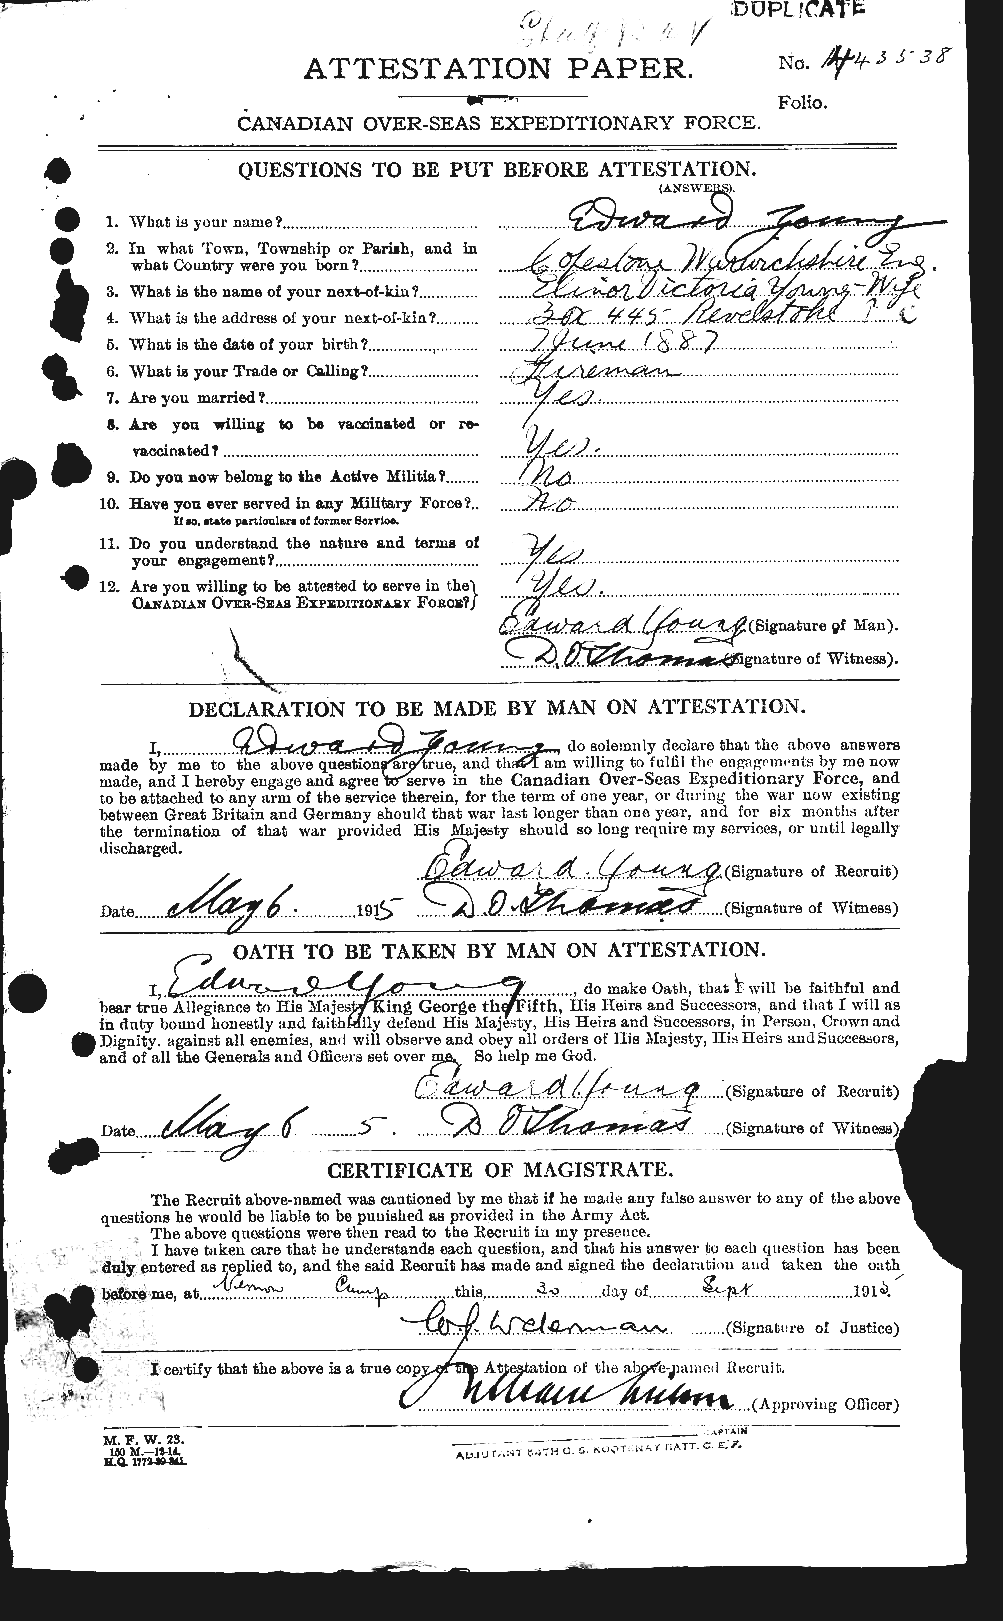 Personnel Records of the First World War - CEF 690233a